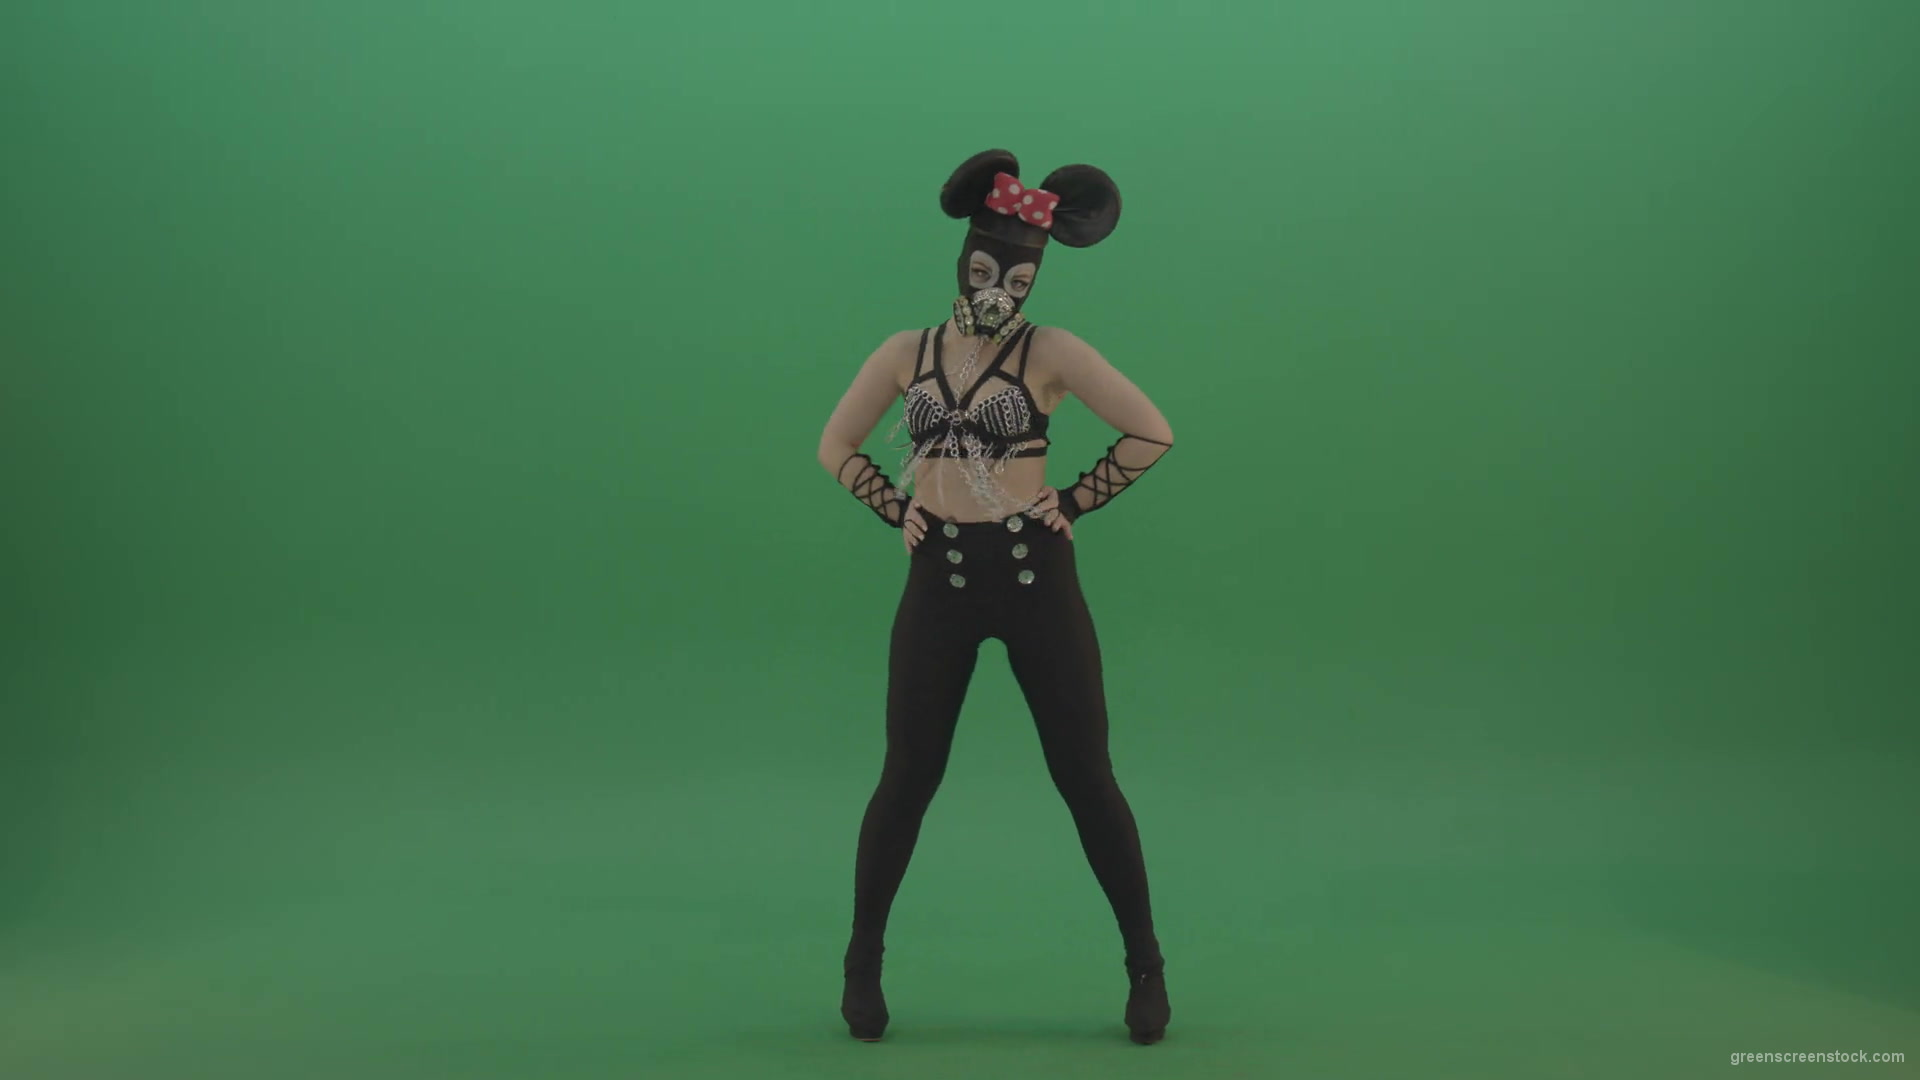 Mickey-Mouse-girl-dancing-cyclically-in-the-sides-of-a-sexy-costume-on-green-screen-1920_005 Green Screen Stock